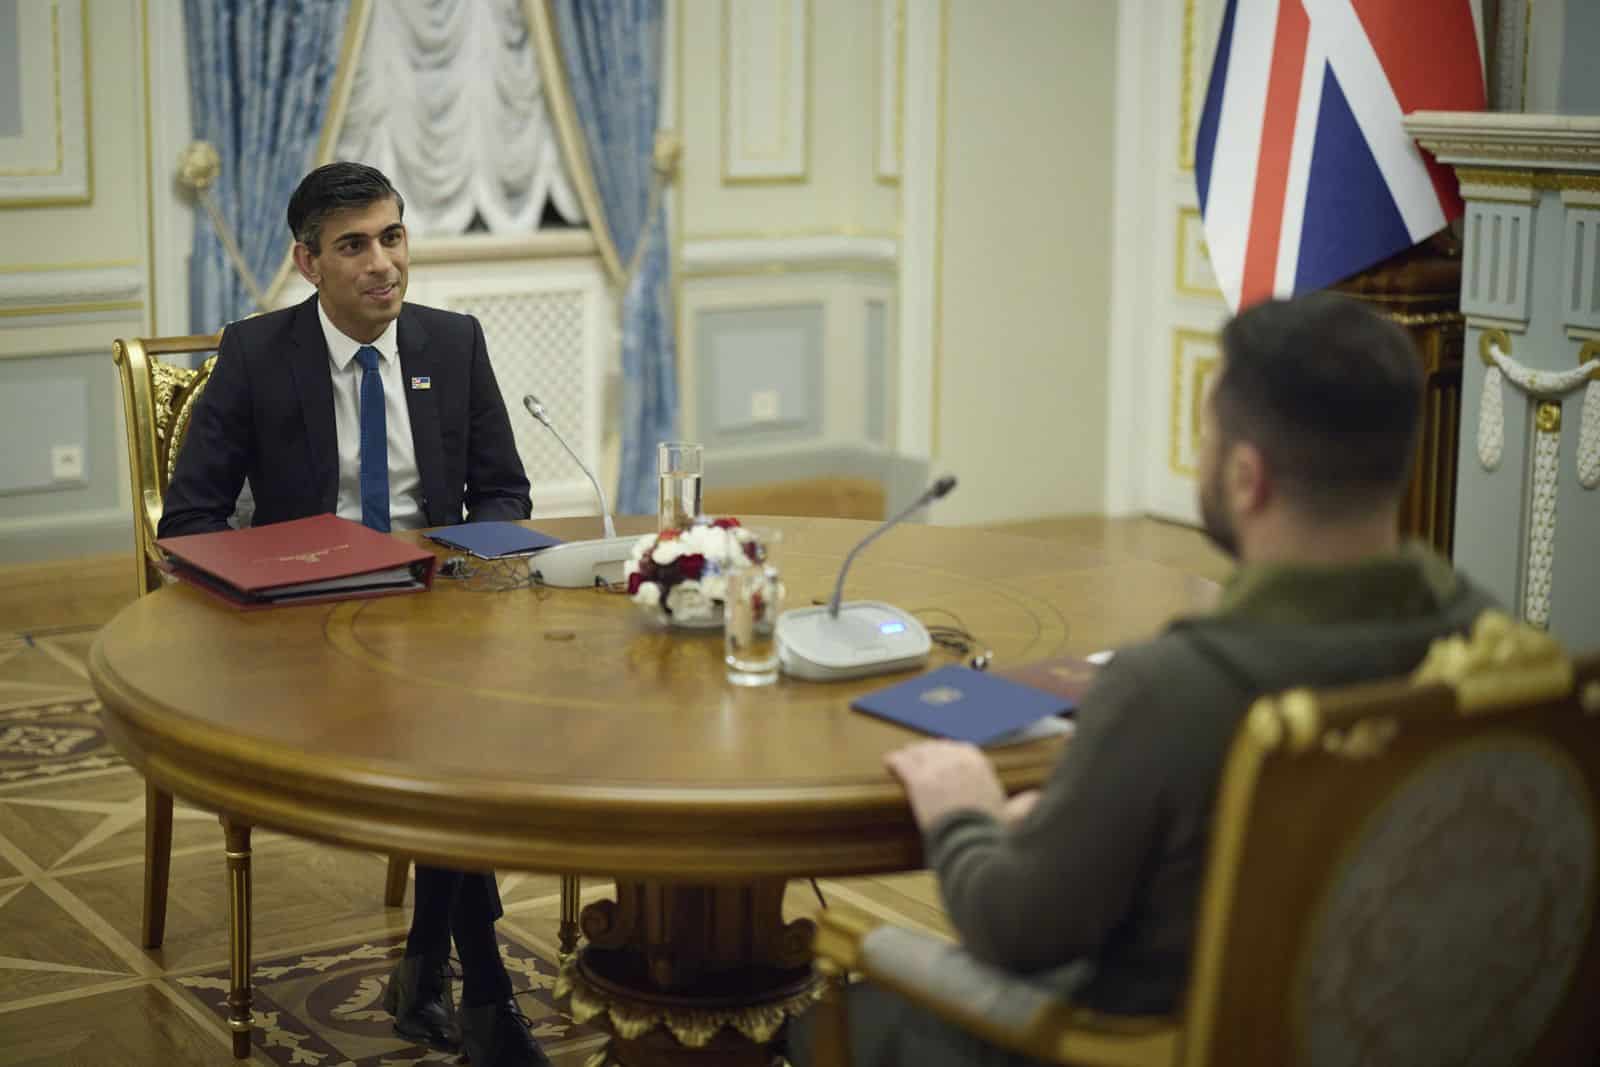 Britain will provide Ukraine with new military aid package worth £50M